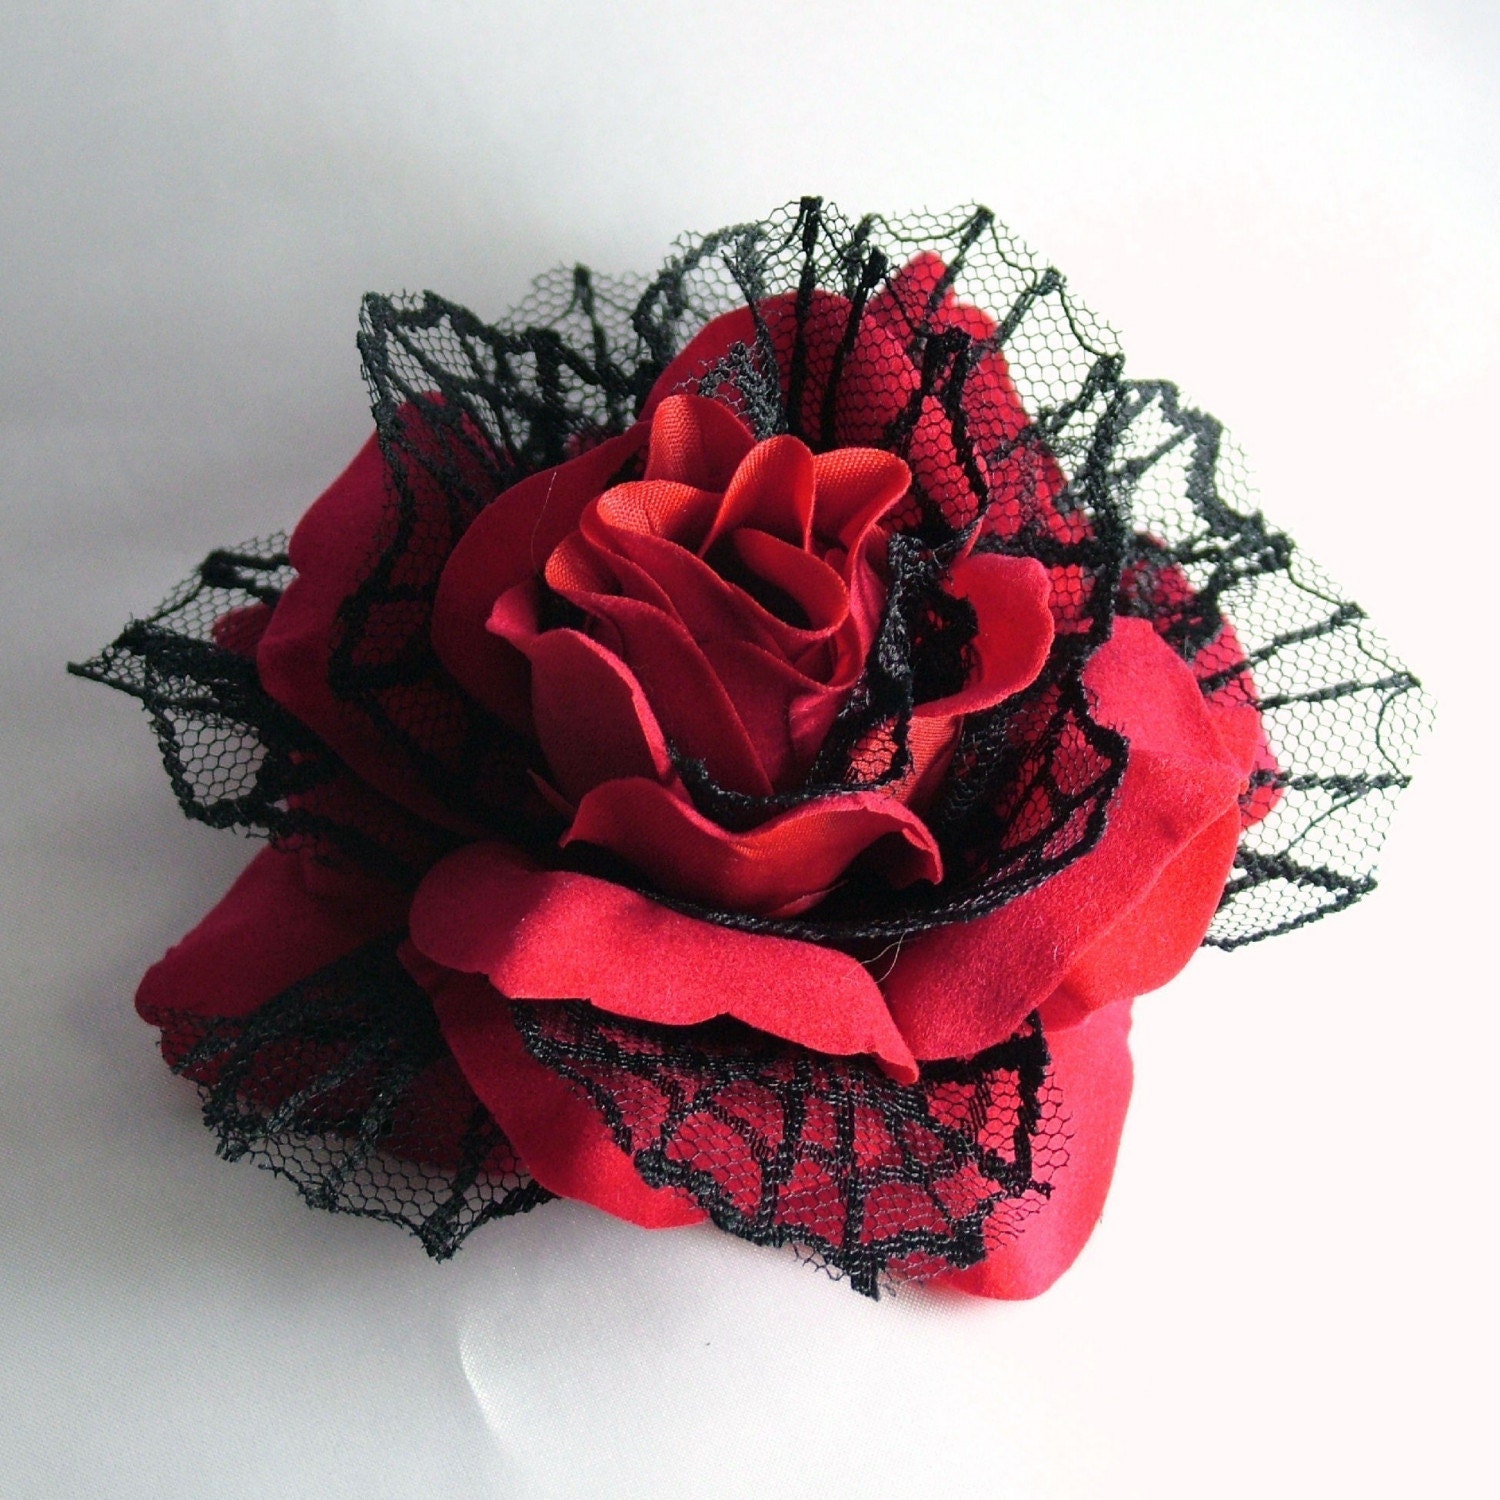 SEXY Big Red Hair Rose Flower with Black Net Spider Web Petals